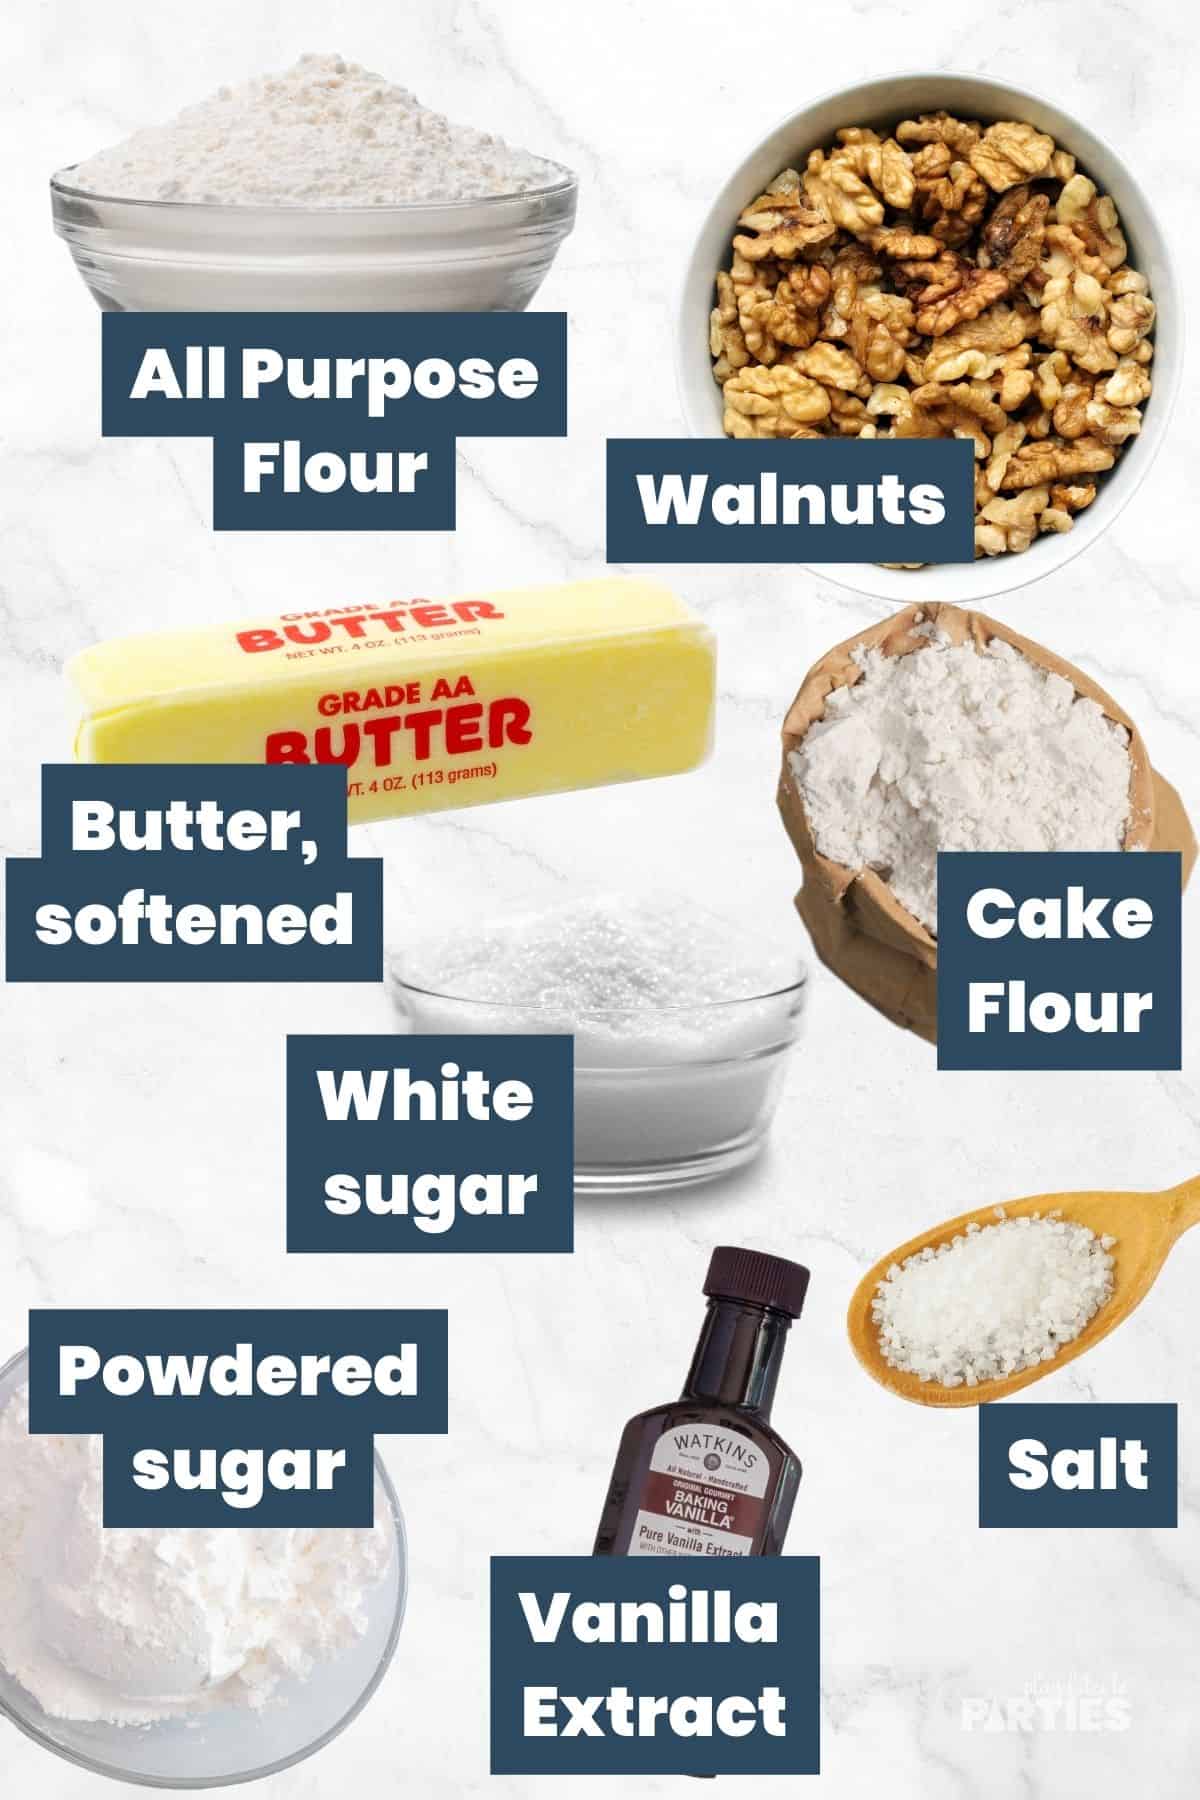 Ingredients include flour, walnuts, butter, sugar, extract, and salt.